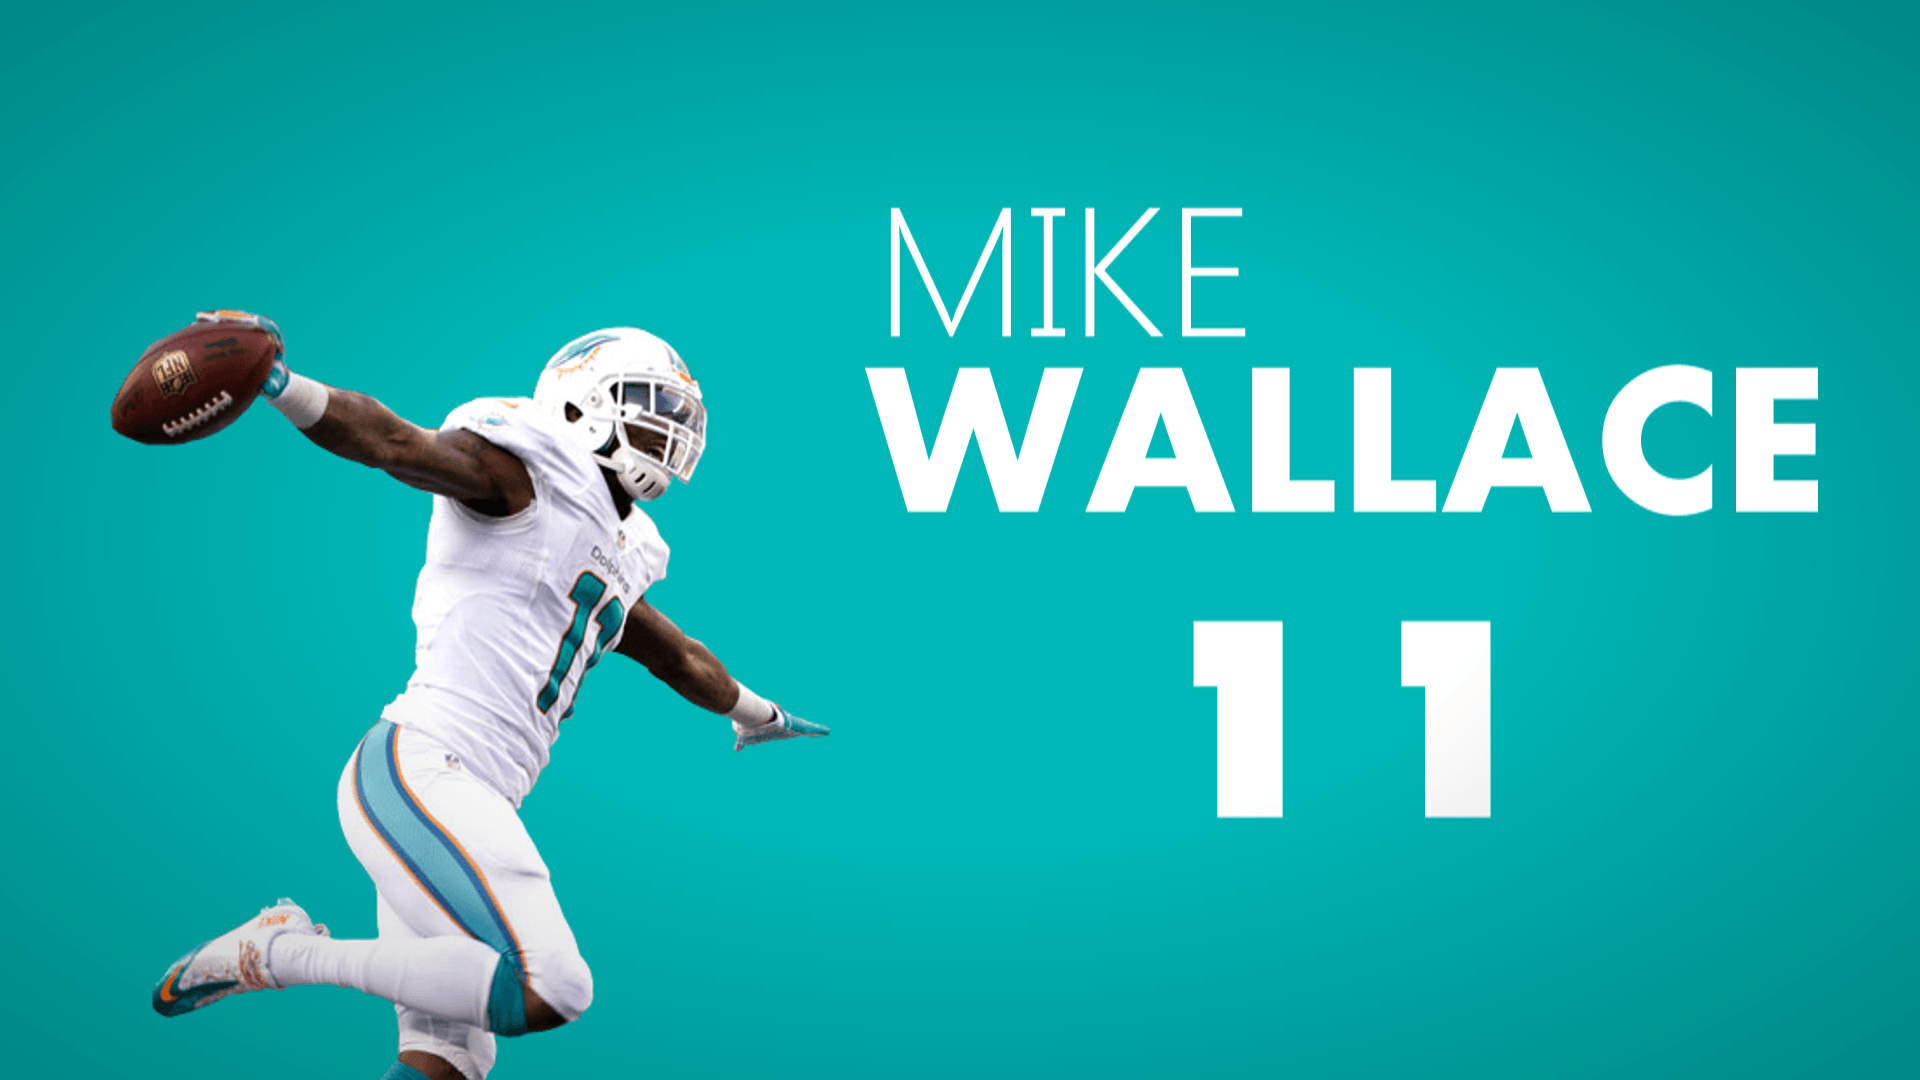 I edited the picture of Mike Wallace doing the jet and turned it